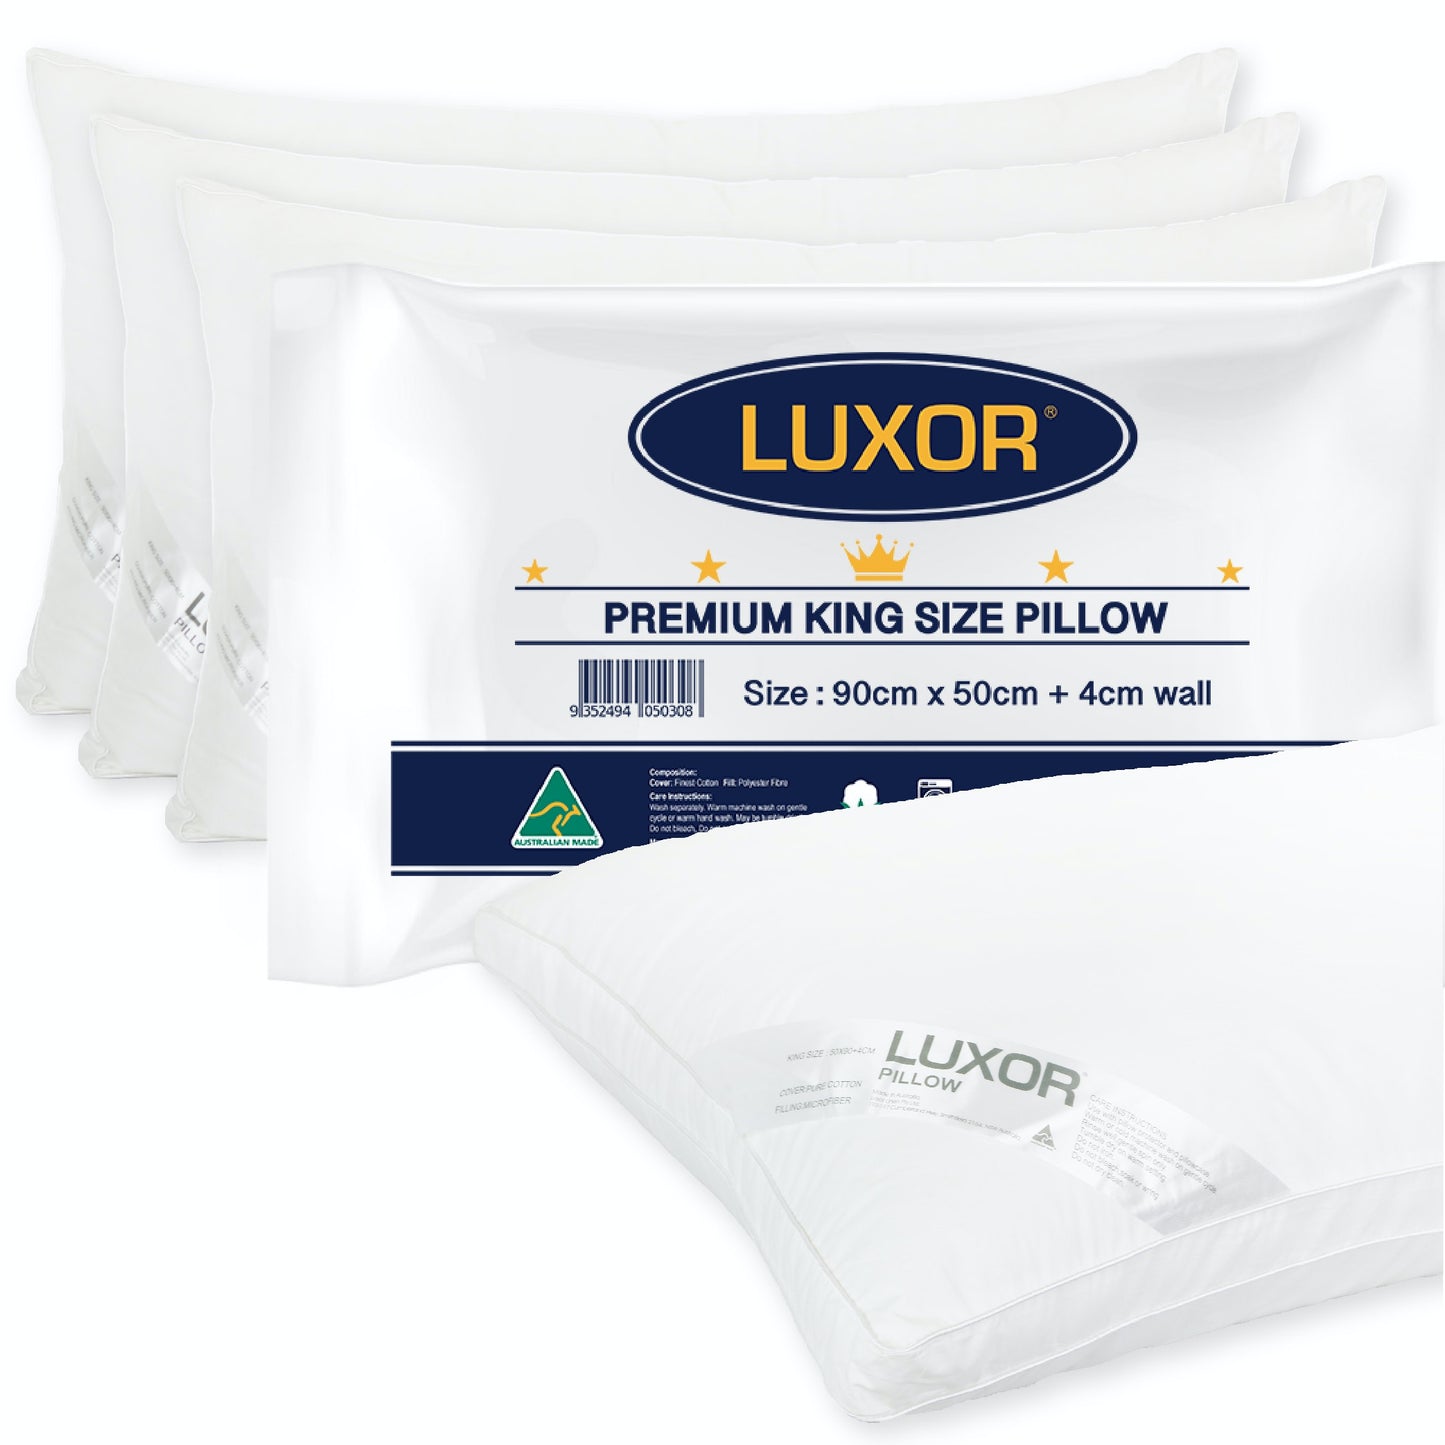 Luxor Australian Made Hotel - King Size Pillow with 4cm Wall  - 1 Pack, 2 Pack, 4 Pack